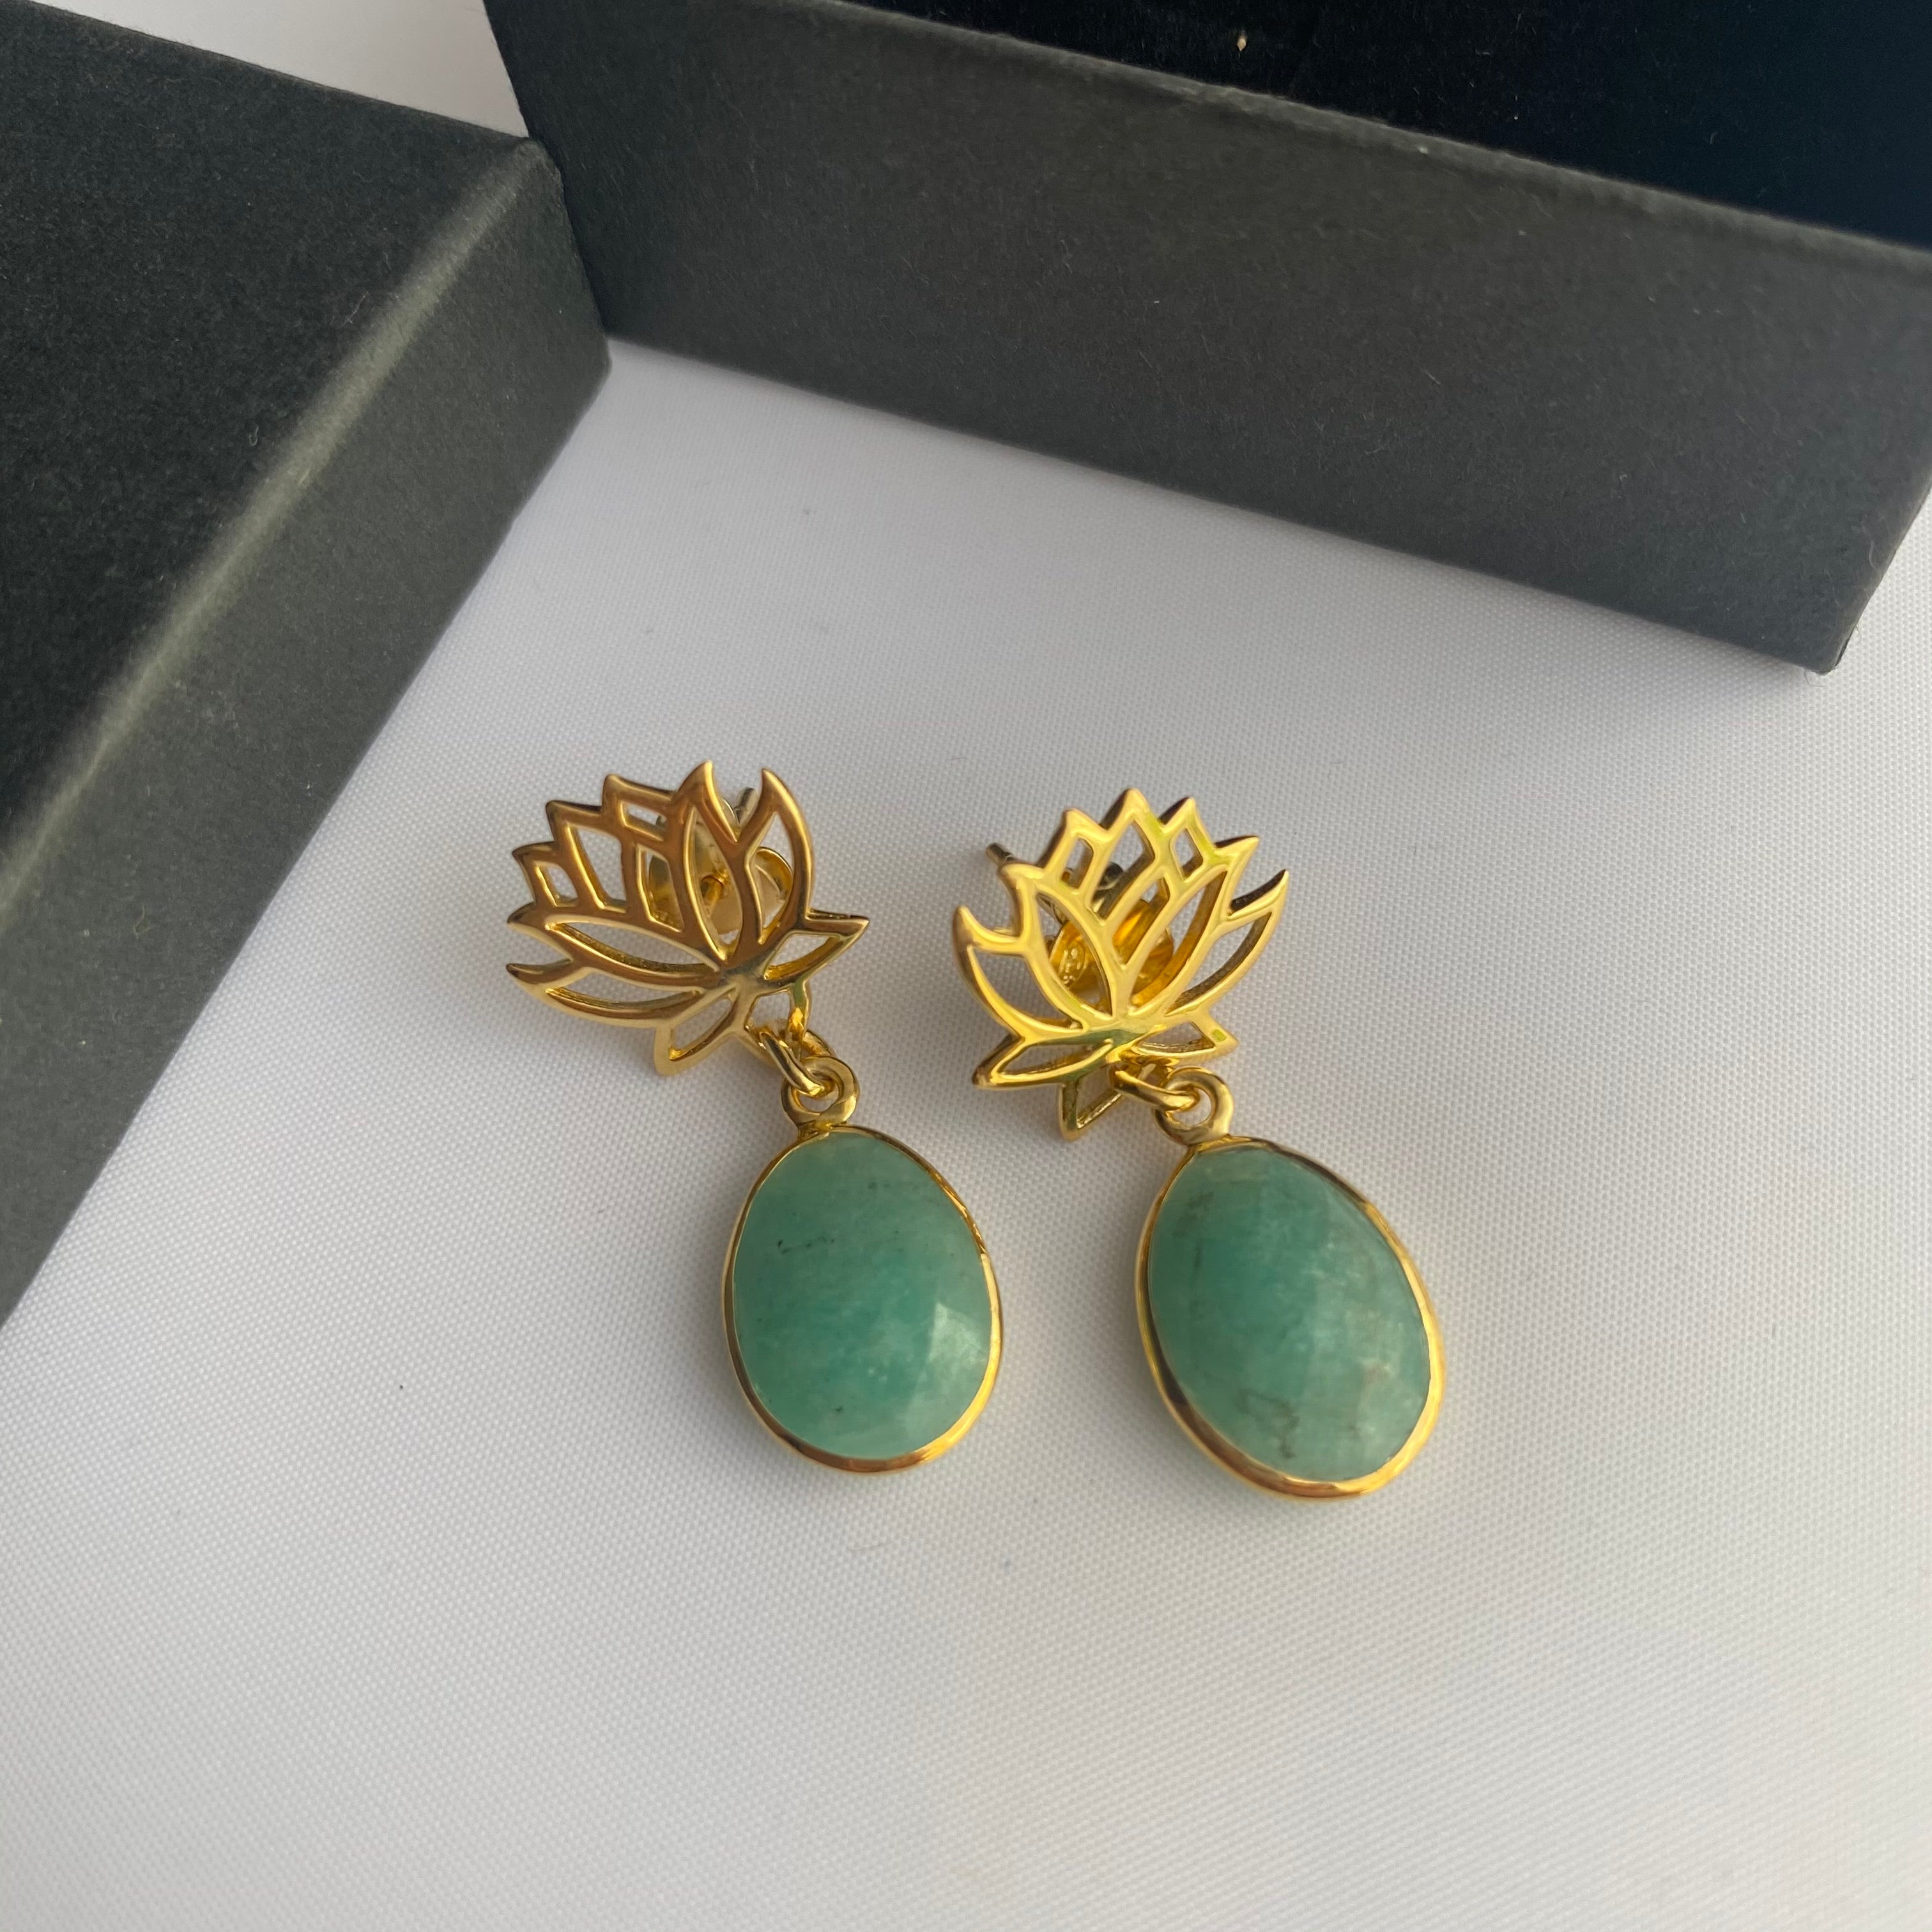 Lotus Earrings in Gold Plated Sterling Silver with an Amazonite Gemstone Drop